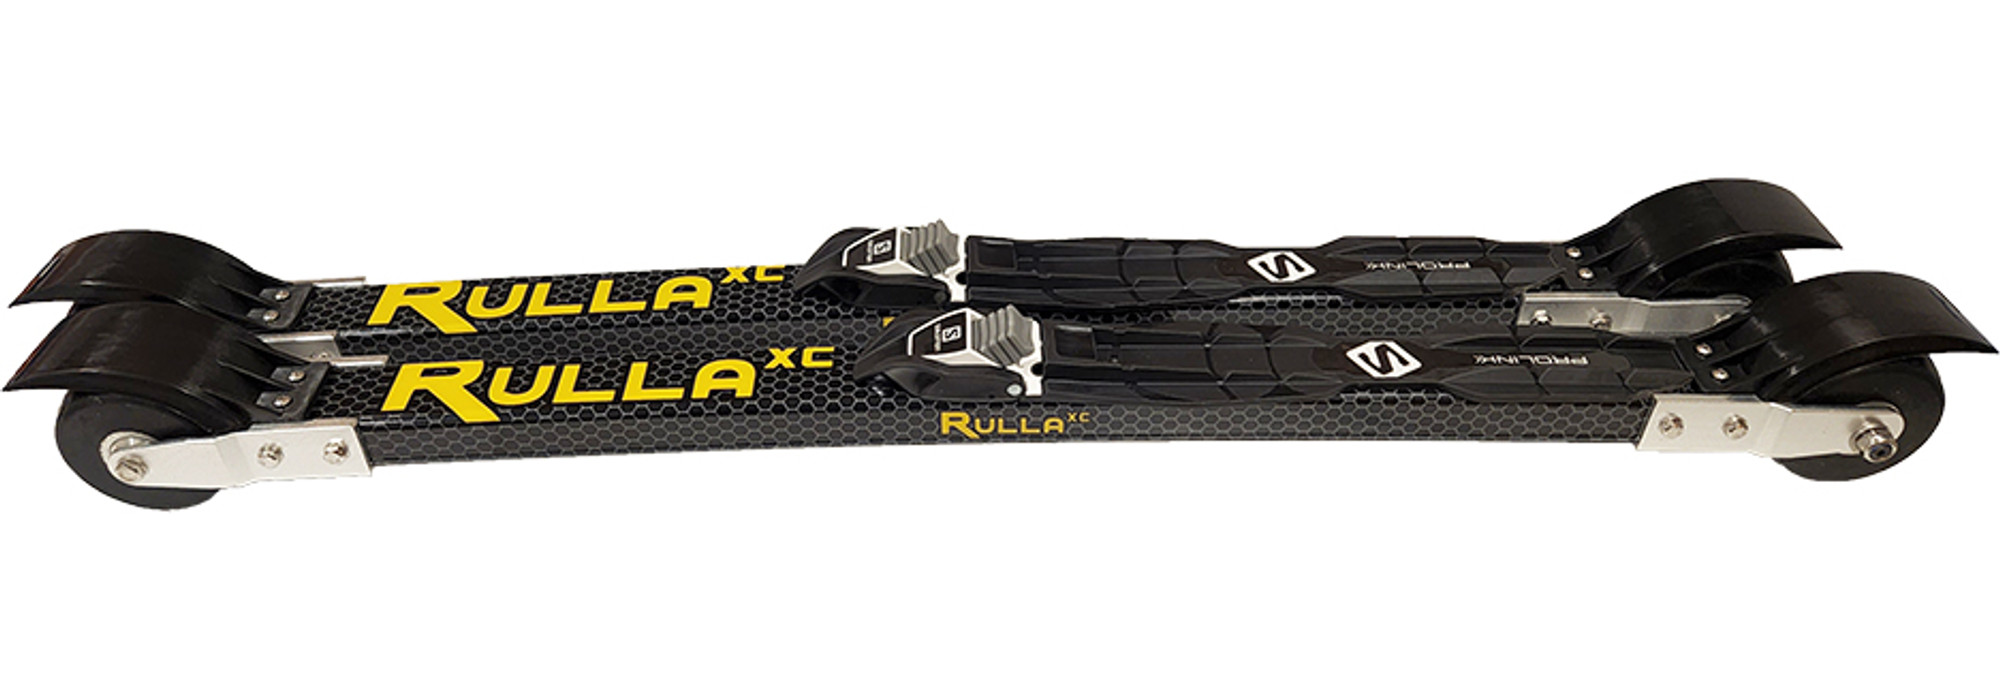 RullaXC Classic Roller Skis with Bindings - RollerskiShop.com LLC